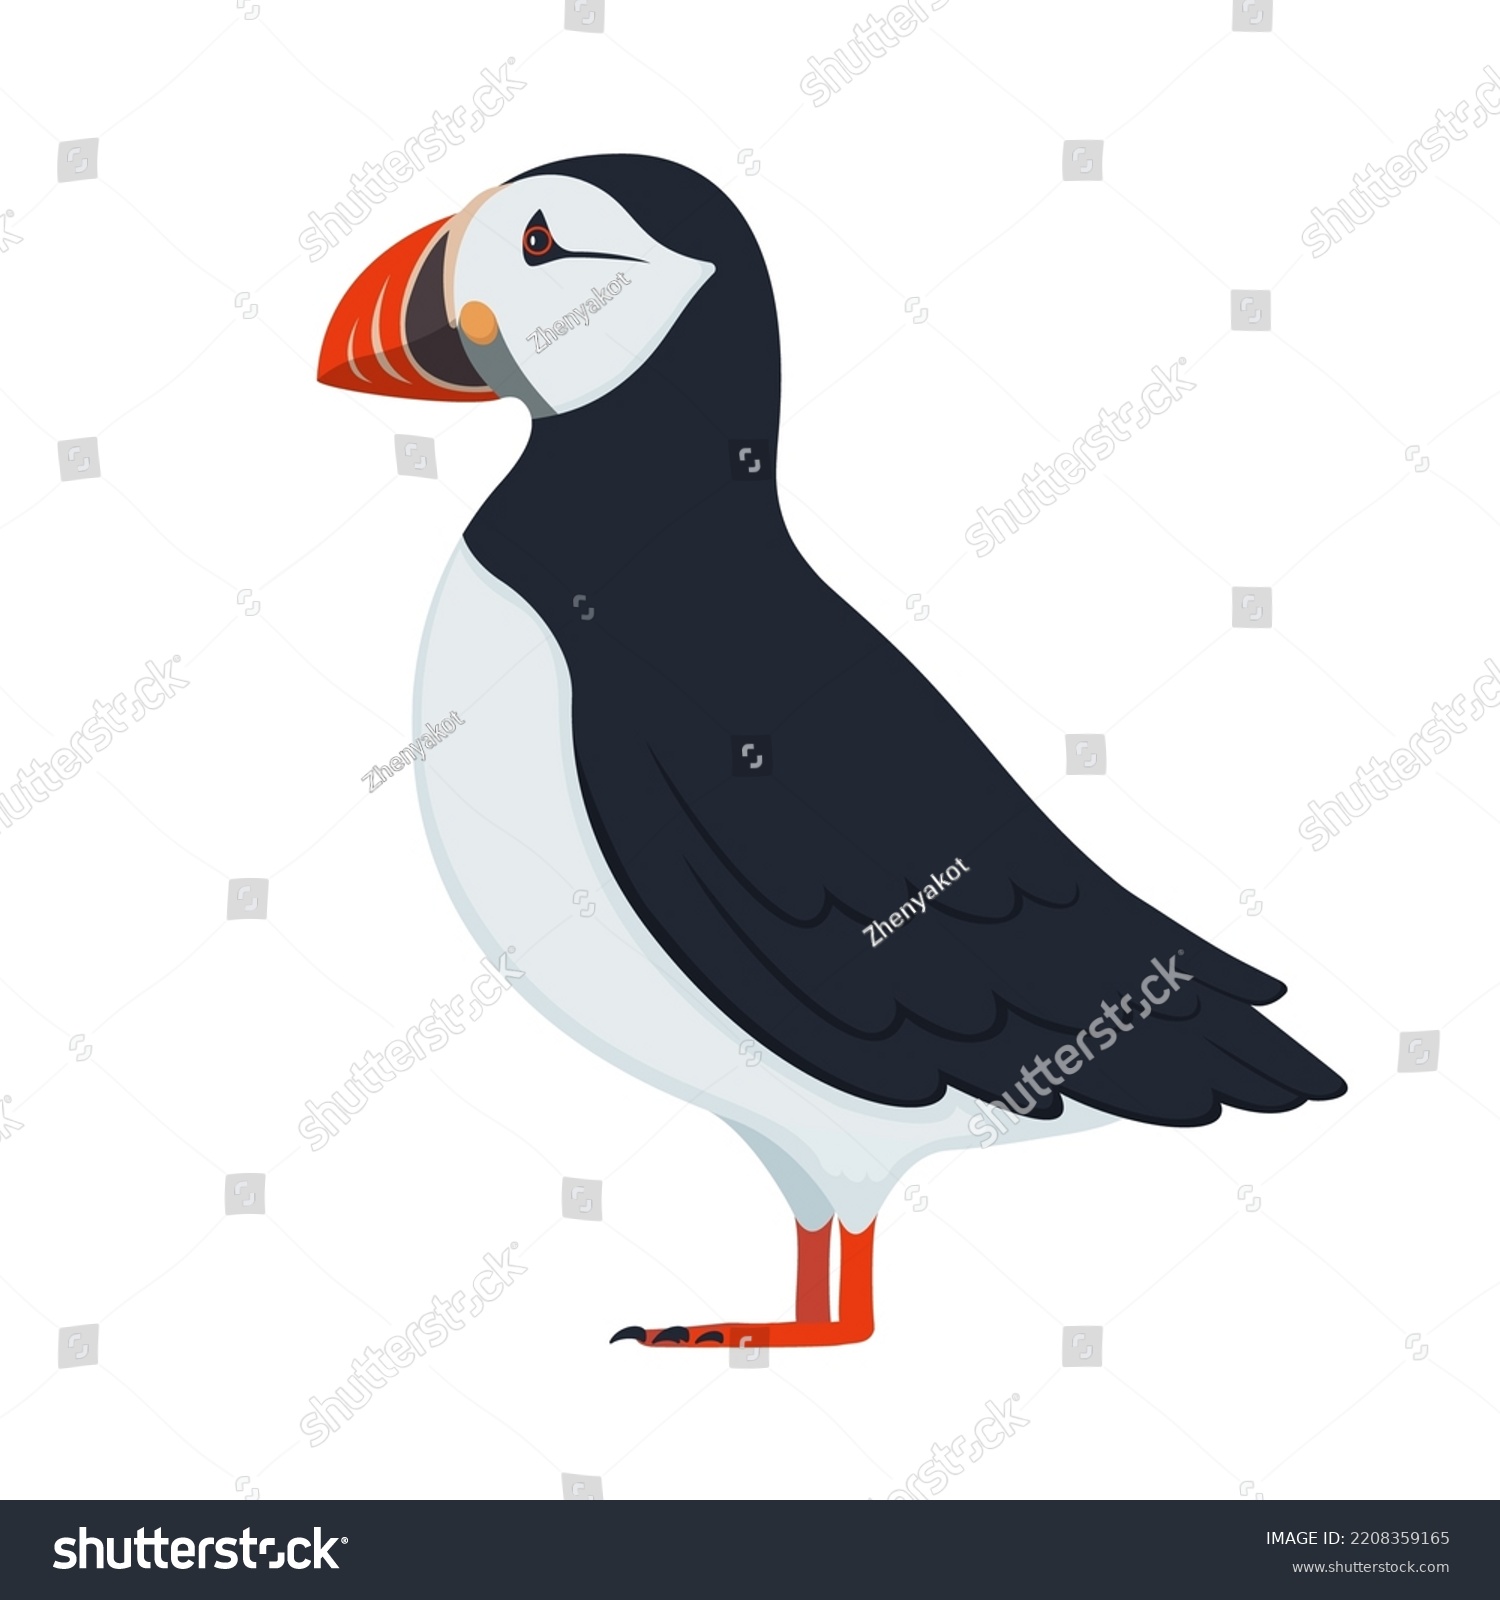 SVG of Puffin bird. Vector illustration of colorful puffin bird isolated on white. Flat design, side view. svg